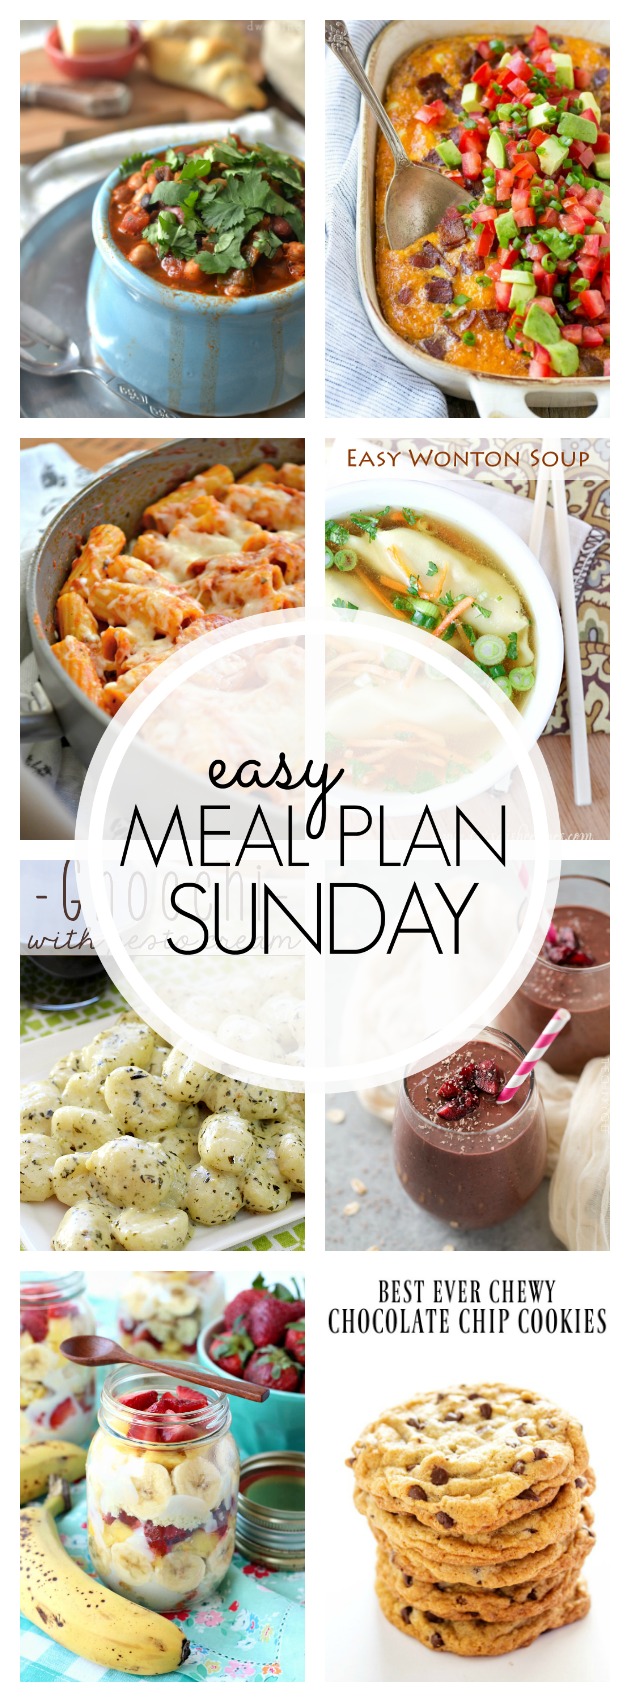 Easy Meal Plan Sunday #86